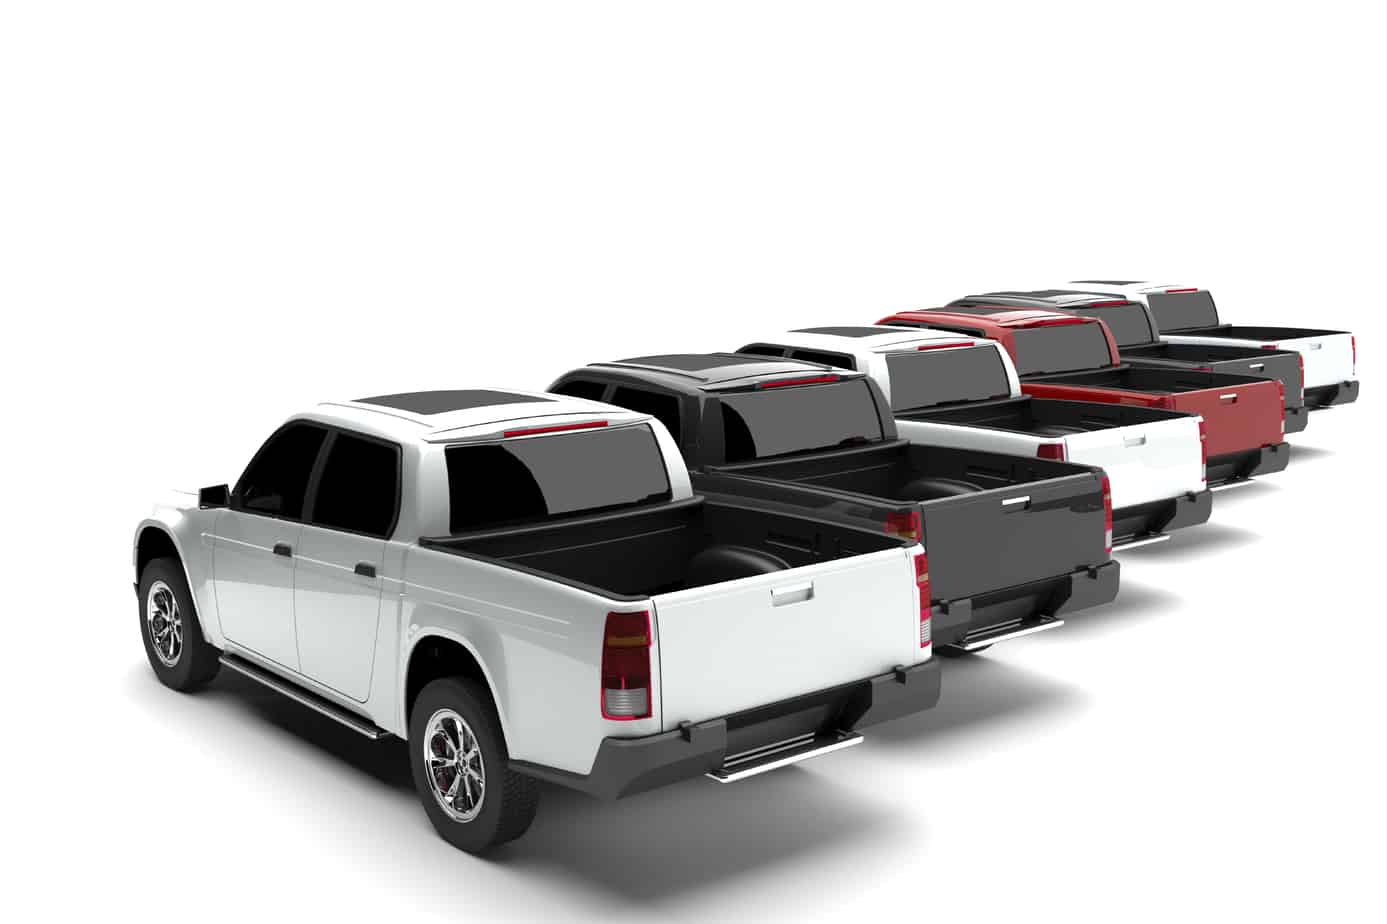 Featured image for “Pickups Going Luxe: Luxury Shoppers Considering Full-​Size Trucks”